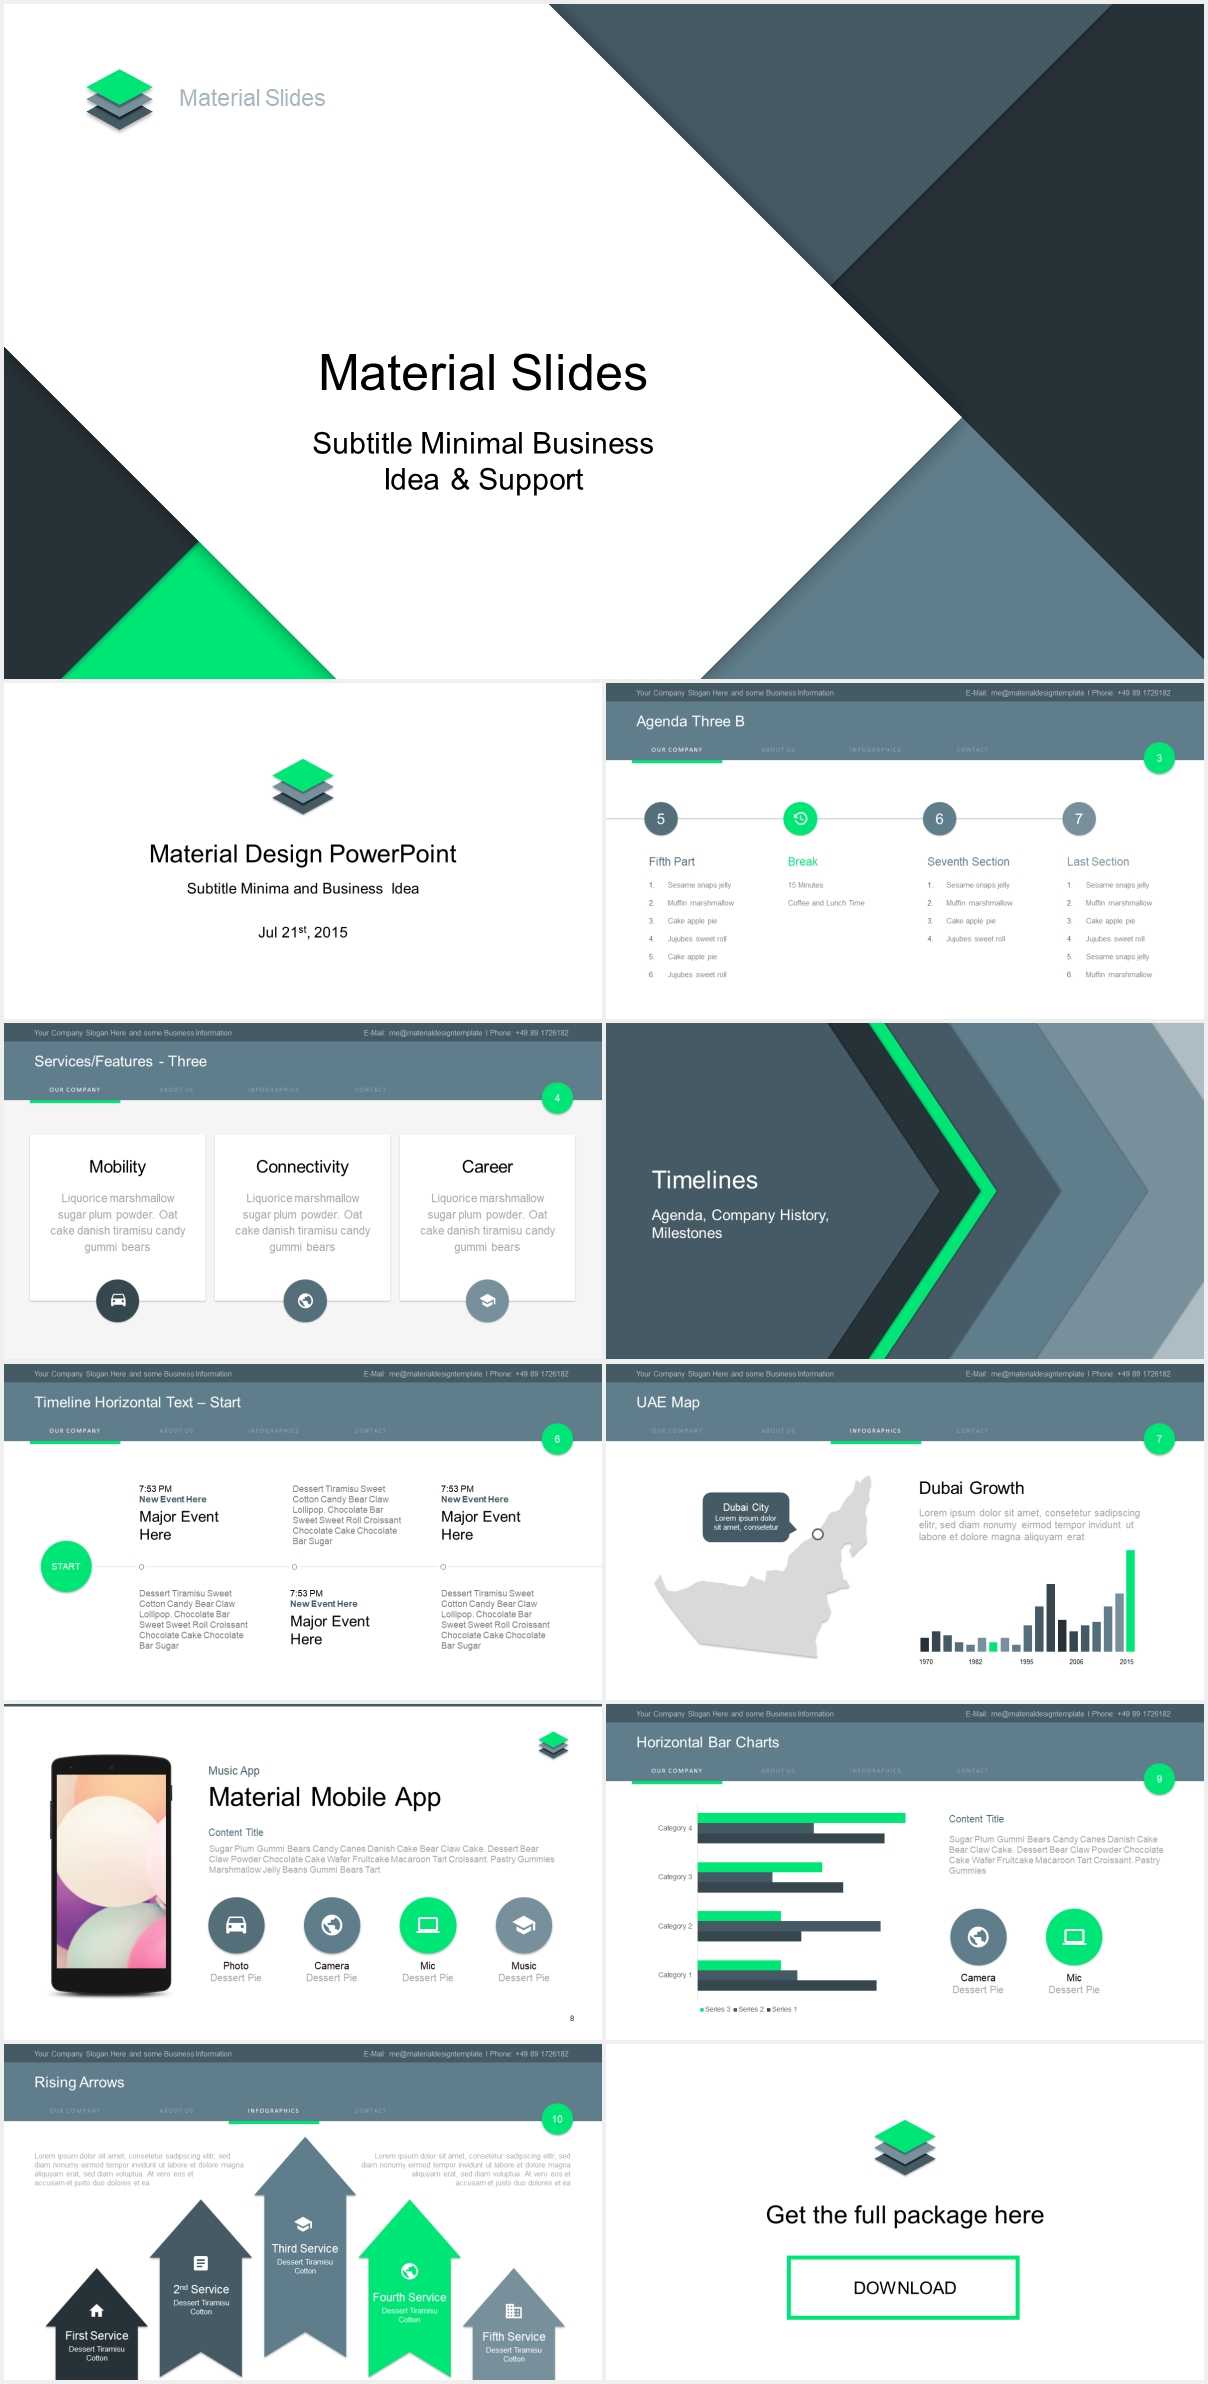 Material Design Powerpoint Template – Just Free Slides Regarding How To Design A Powerpoint Template